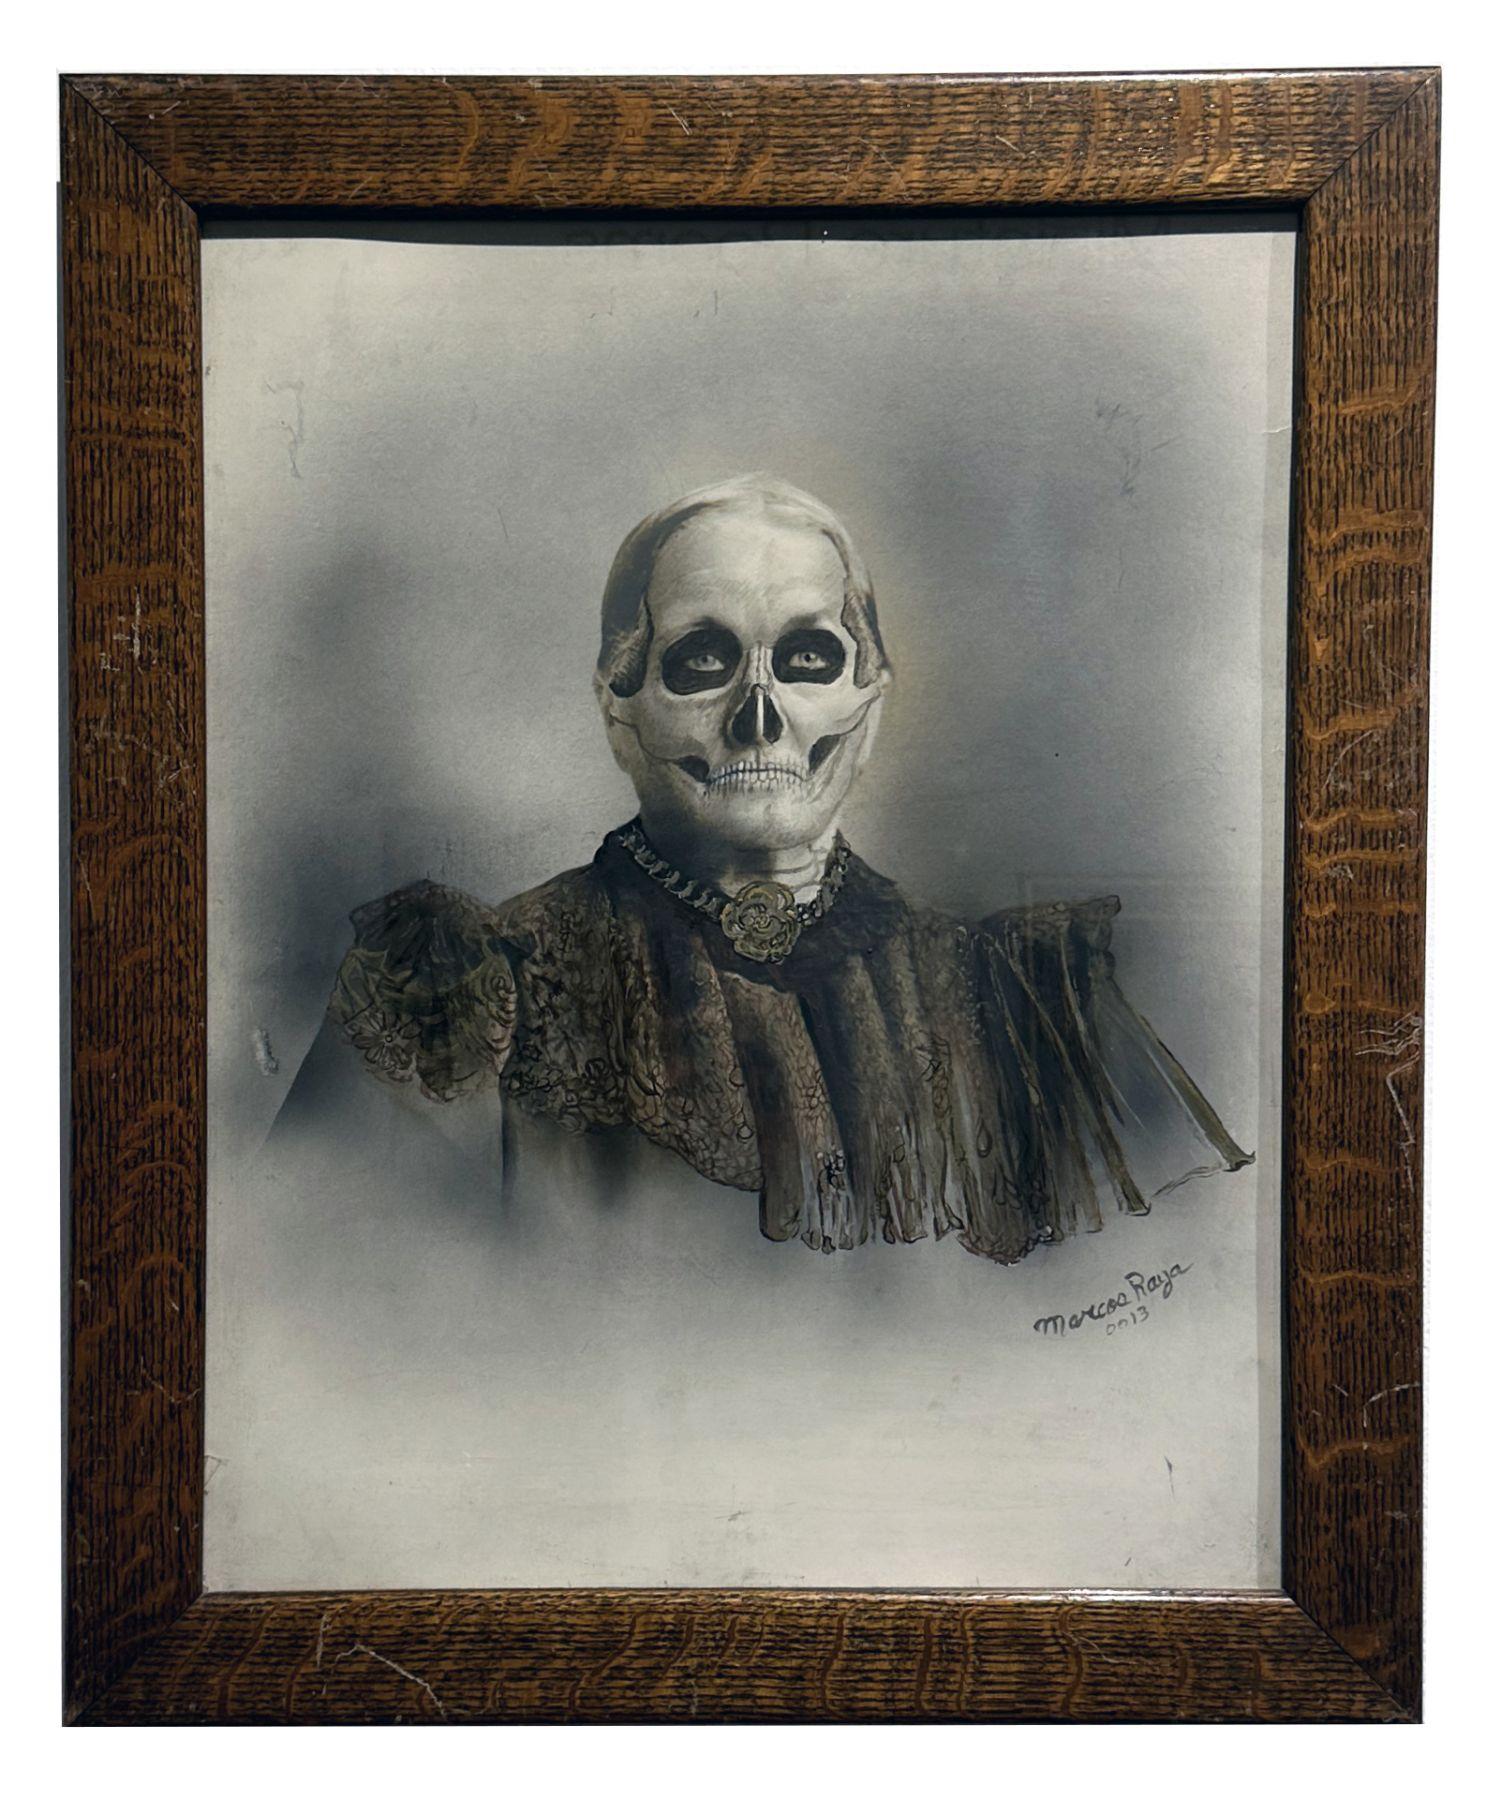 Mom - Antique Painted and Appropriated Photograph, Original Frame - Mixed Media Art by Marcos Raya